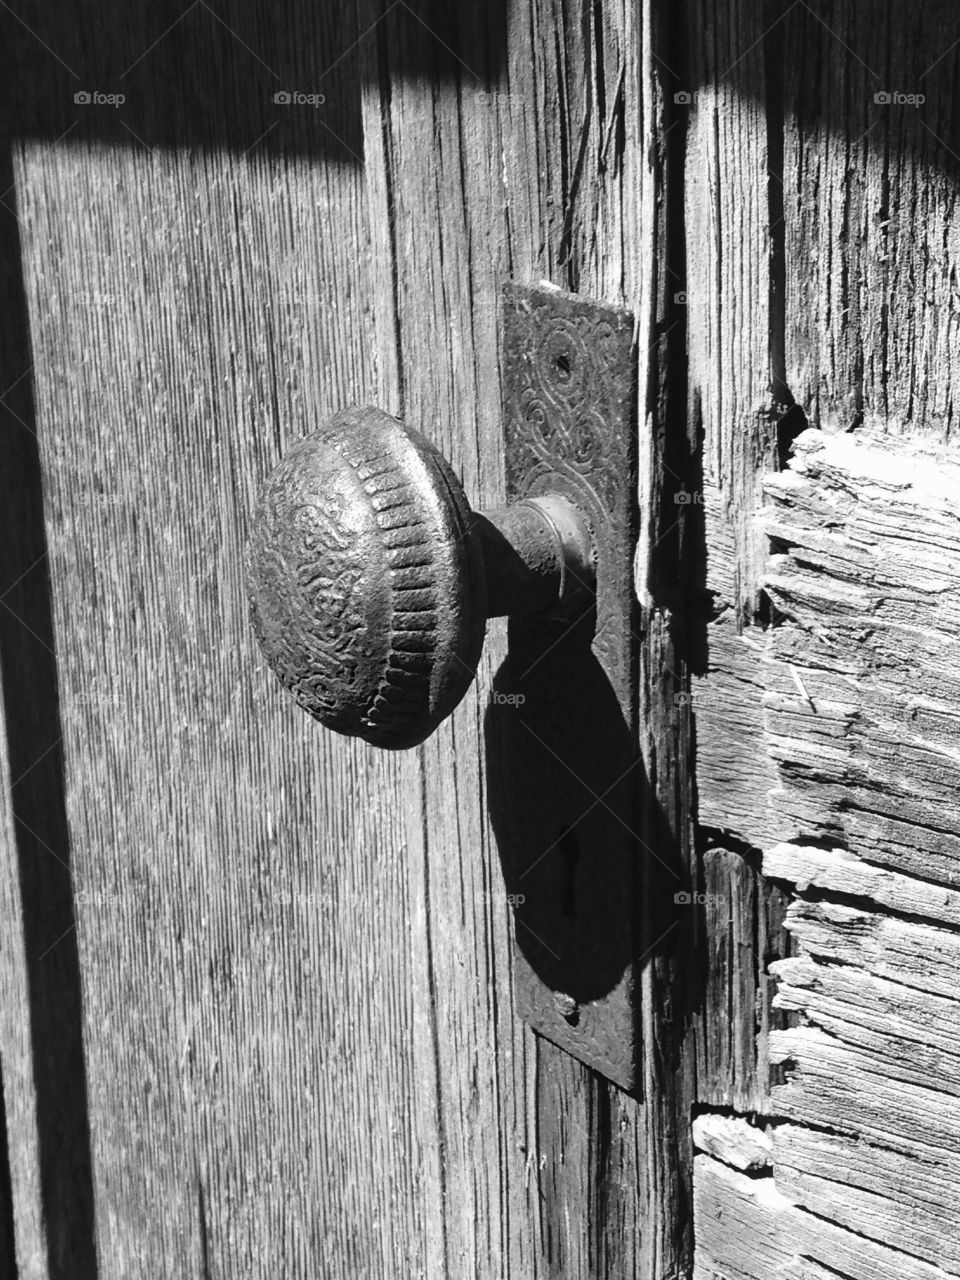 An illustration of days gone by. The only thing left of an old abandoned shack is an old rusty ornamental door knob from the turn of the century.